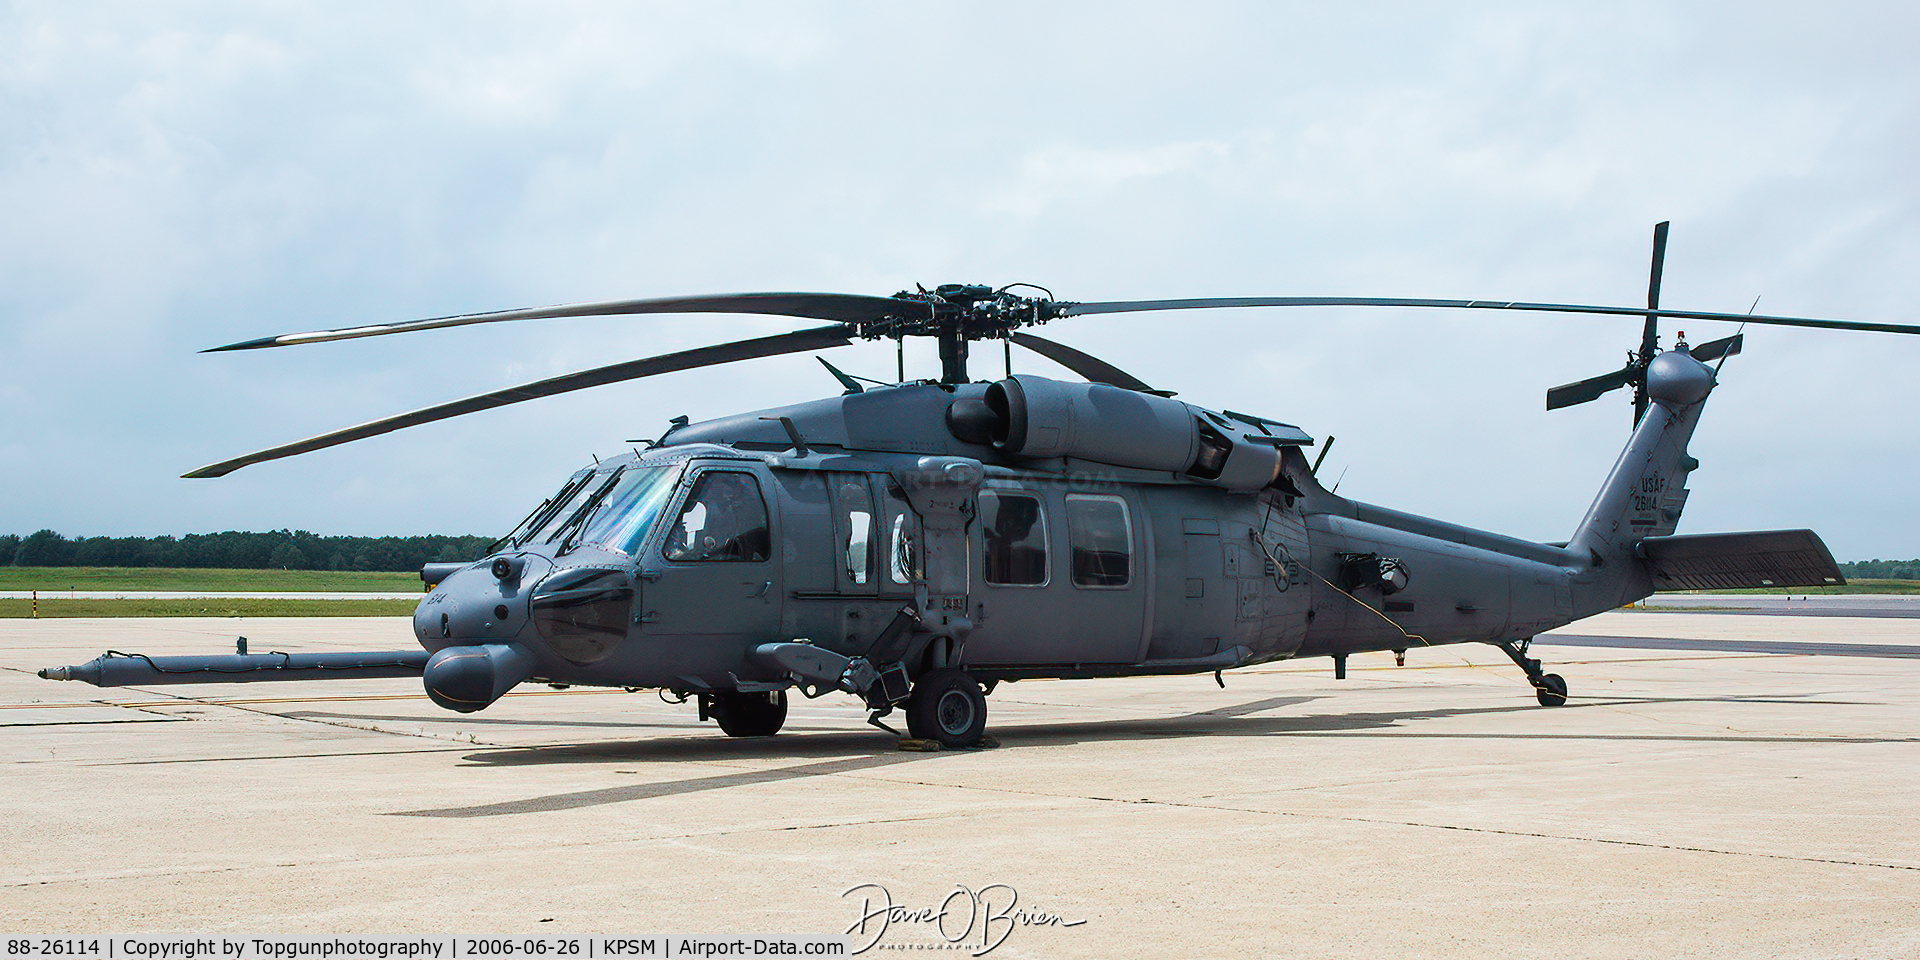 88-26114, 1986 Sikorsky HH-60G Pave Hawk C/N 70.1311, JOLLY21 out of LI stops in to work in the White Mountains of NH